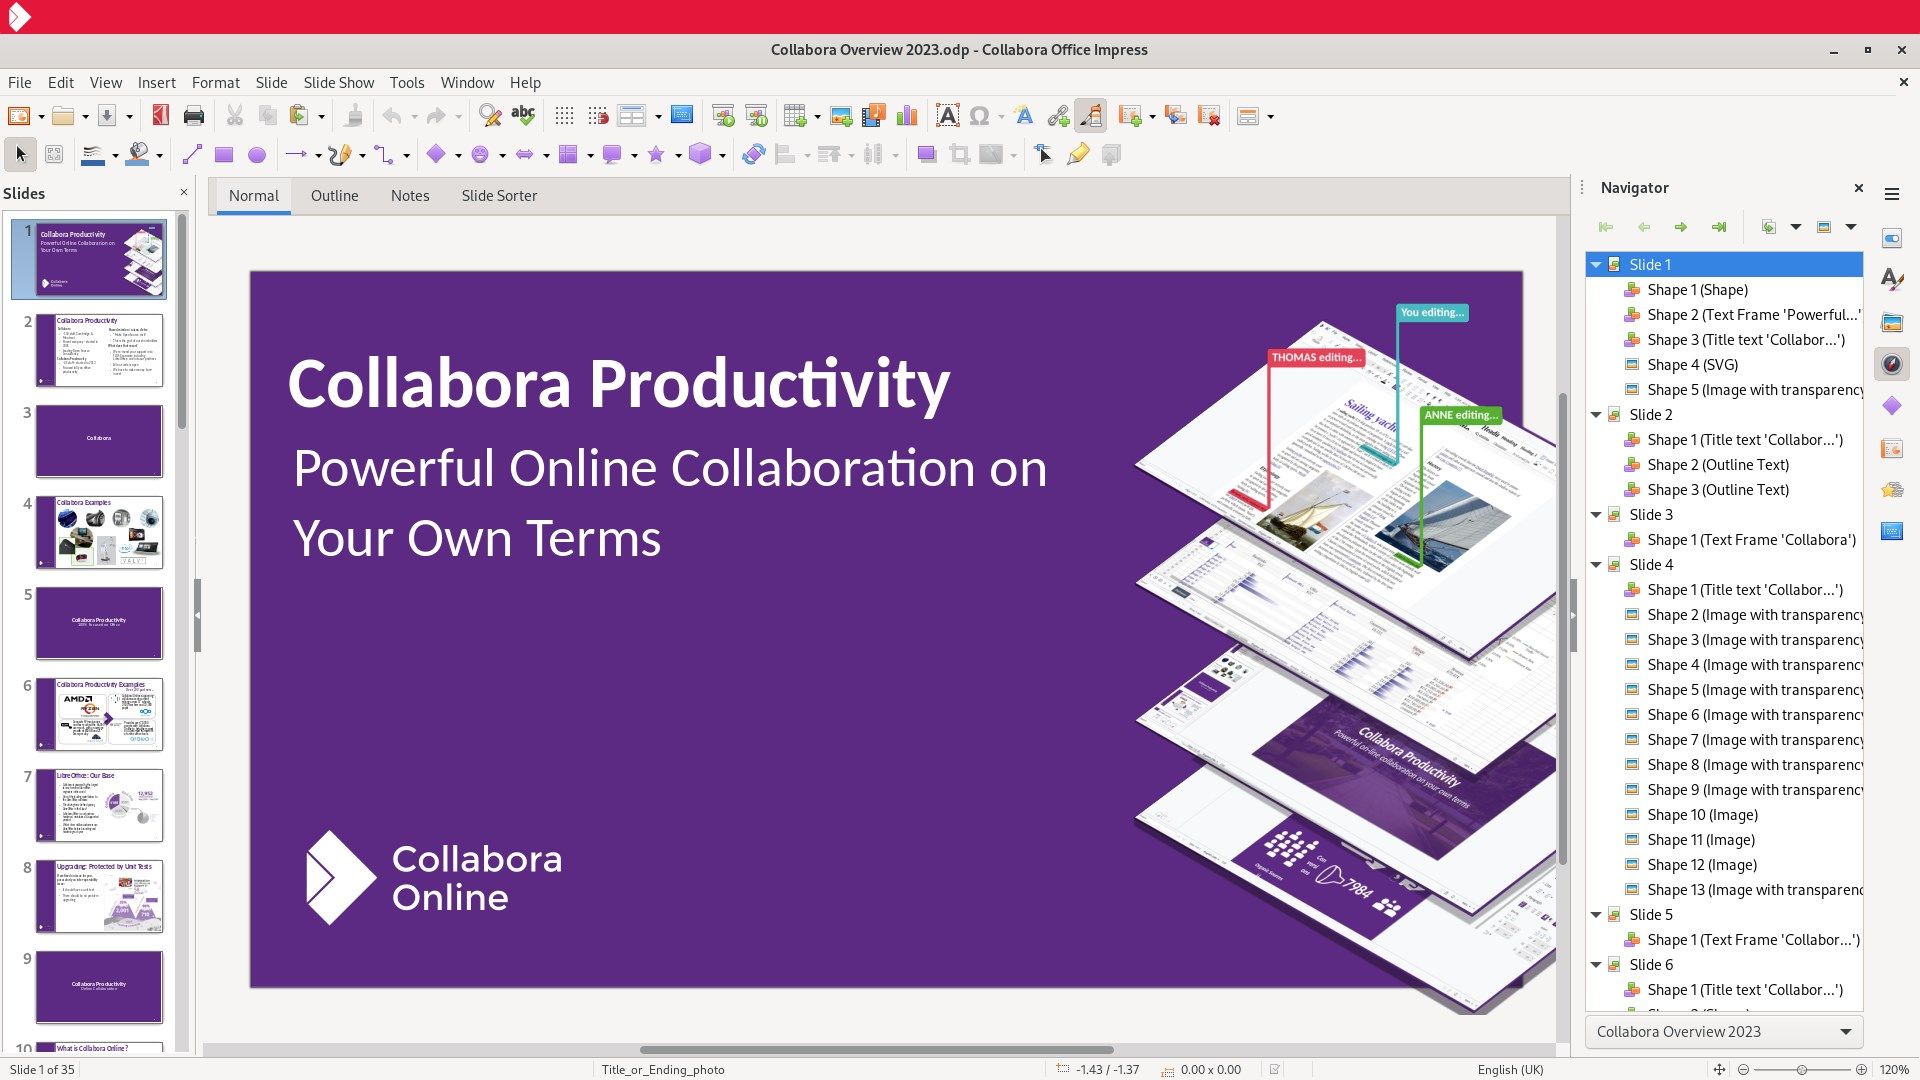 Collabora Office Impress – for presentations